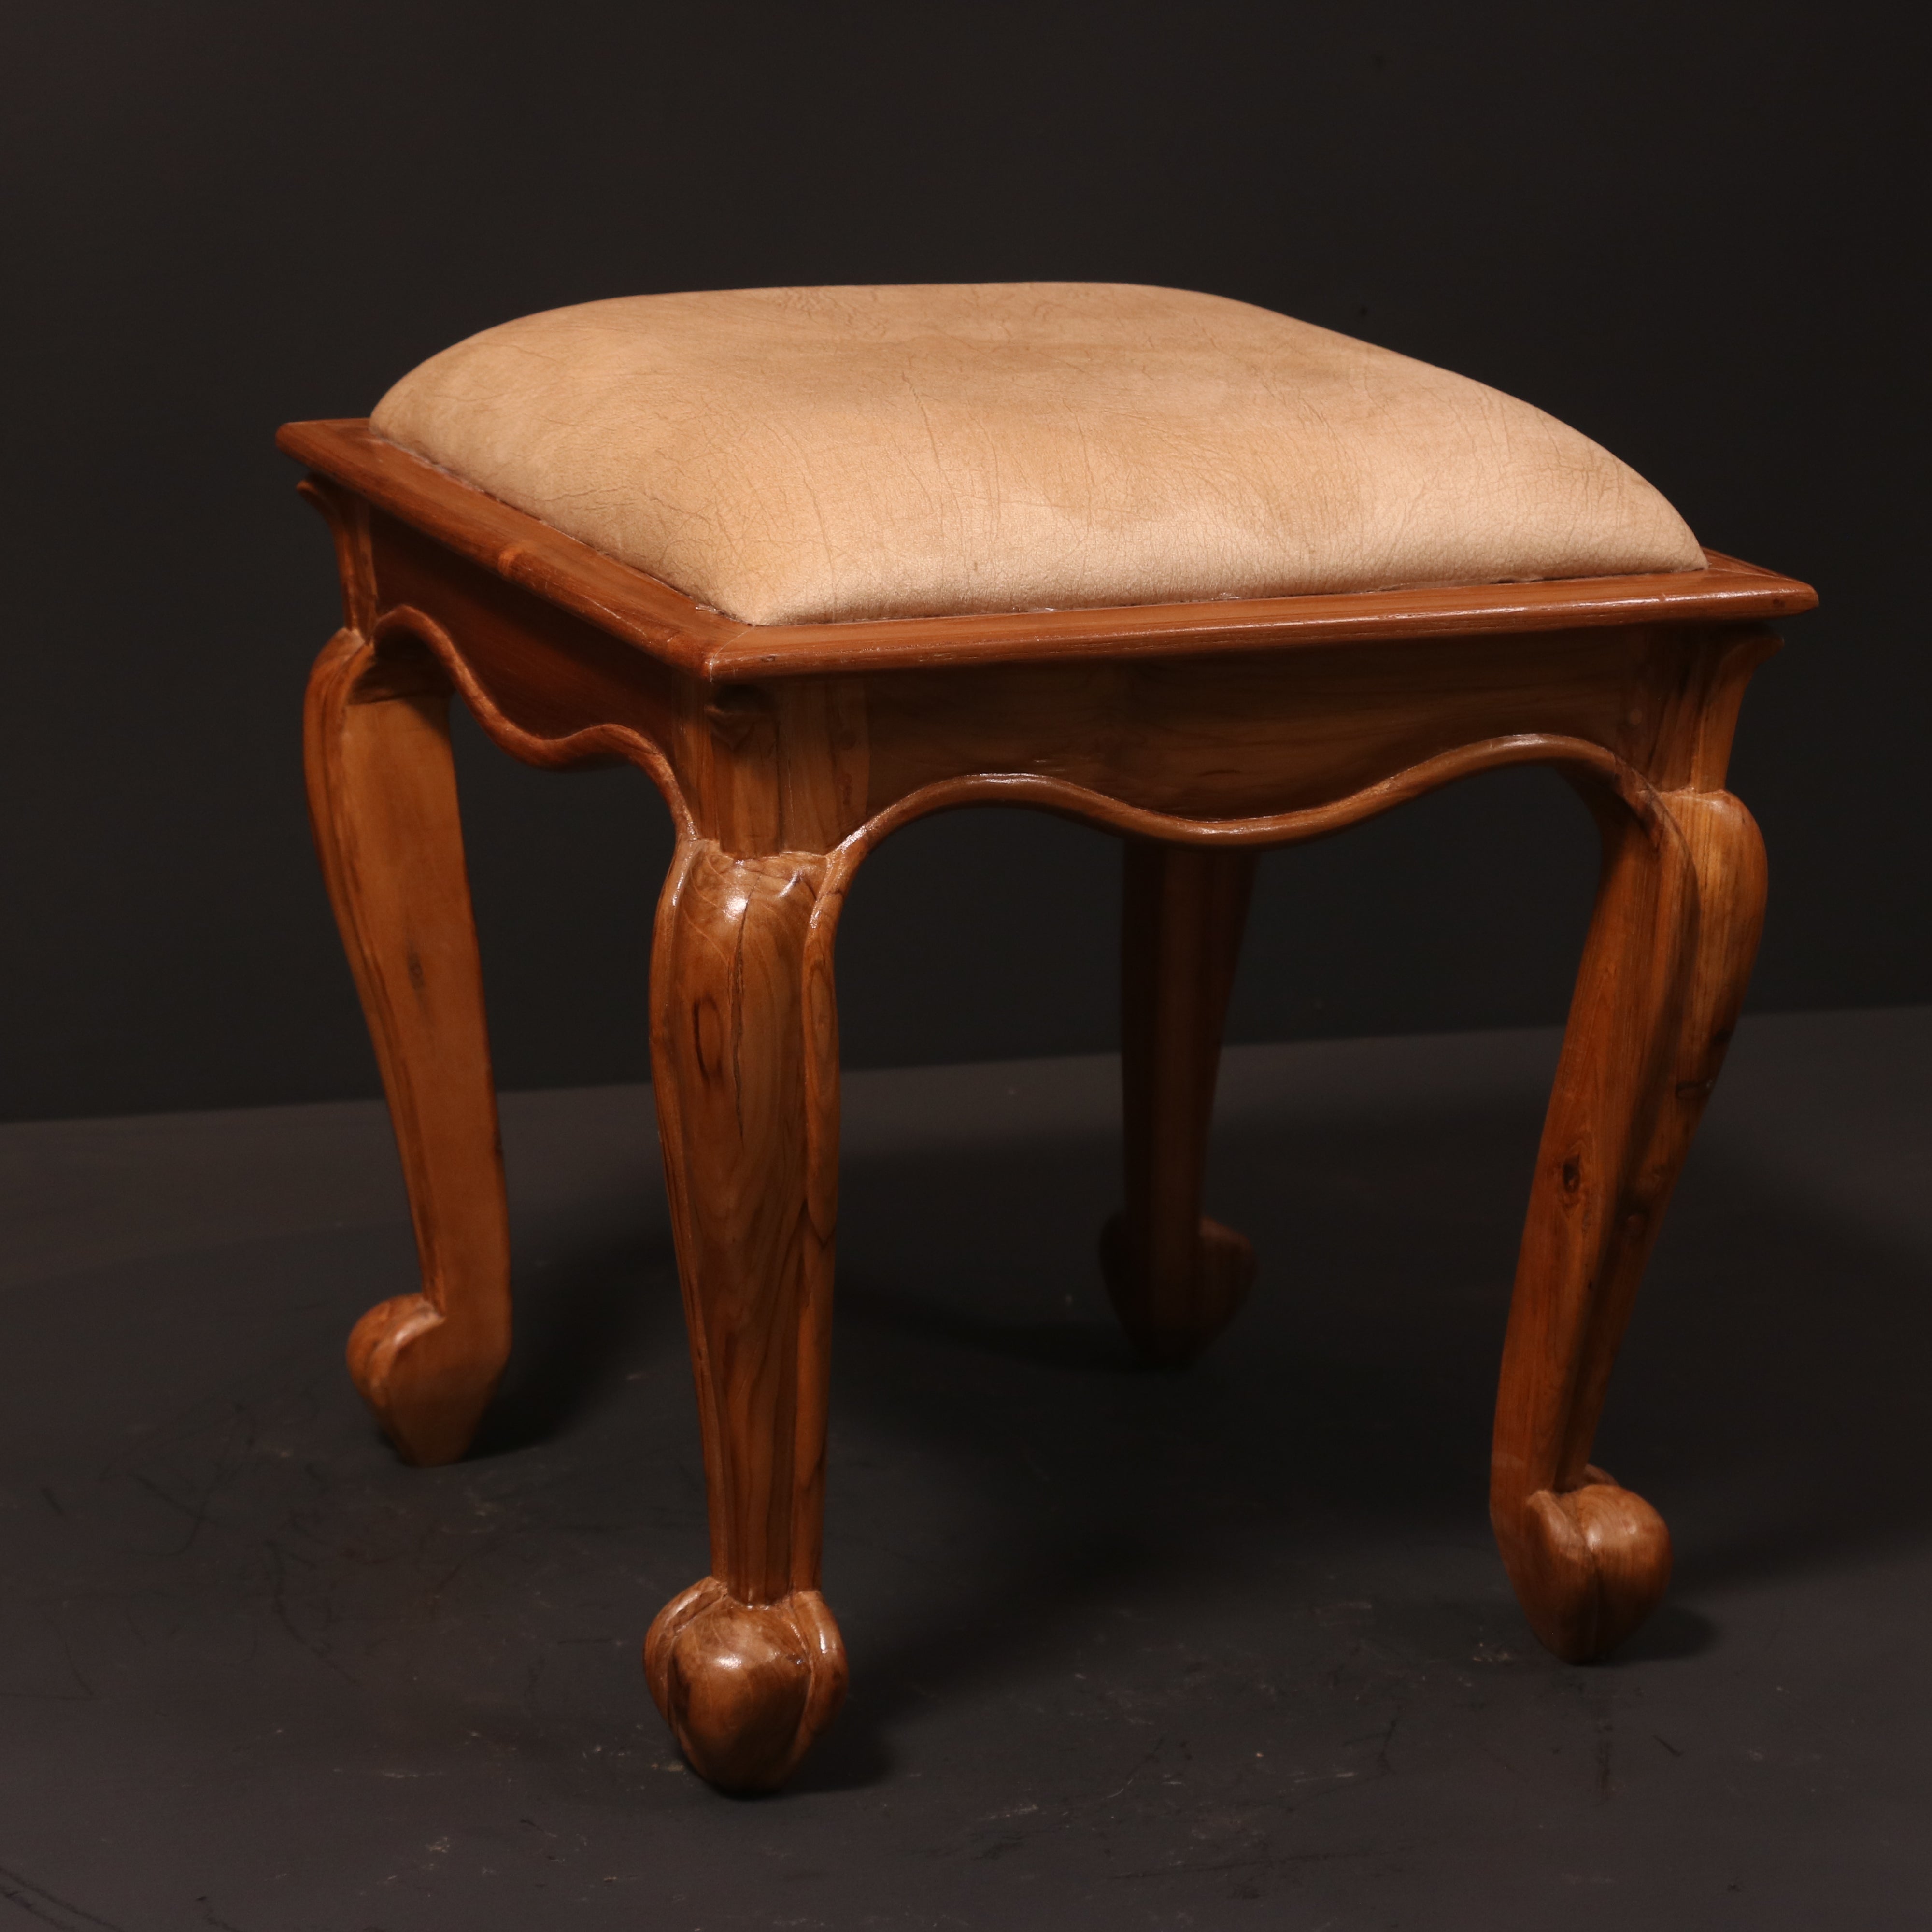 Classic Wooden Carved Stool Default Title Stool